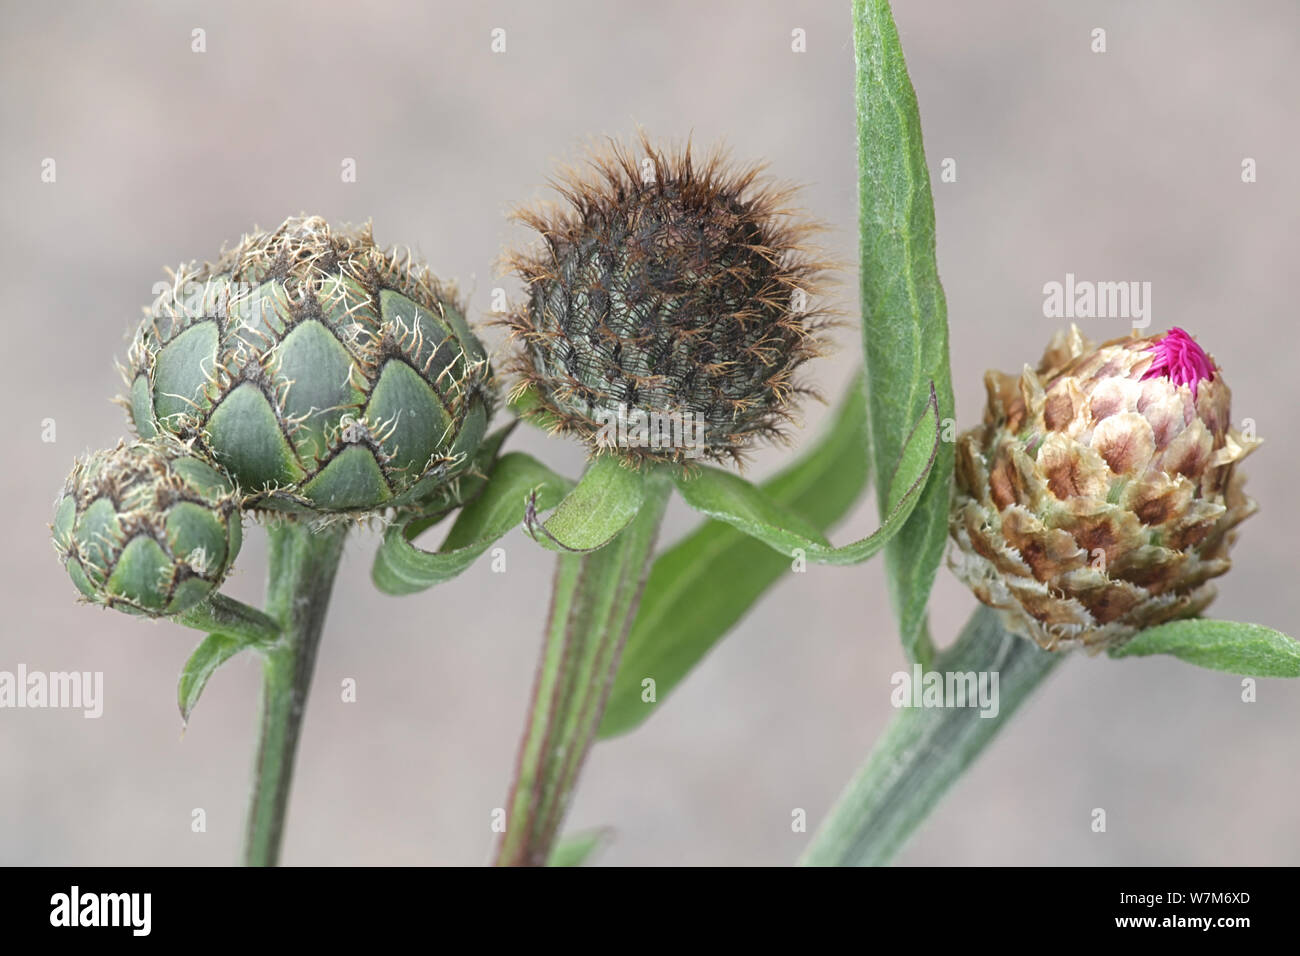 From left to right: Greater Knapwed (Centaurea scabiosa), Wig Knapweed (Centaurea phrygia),  and far right Brown-rayed Knapweed (Centaurea jacea) Stock Photo